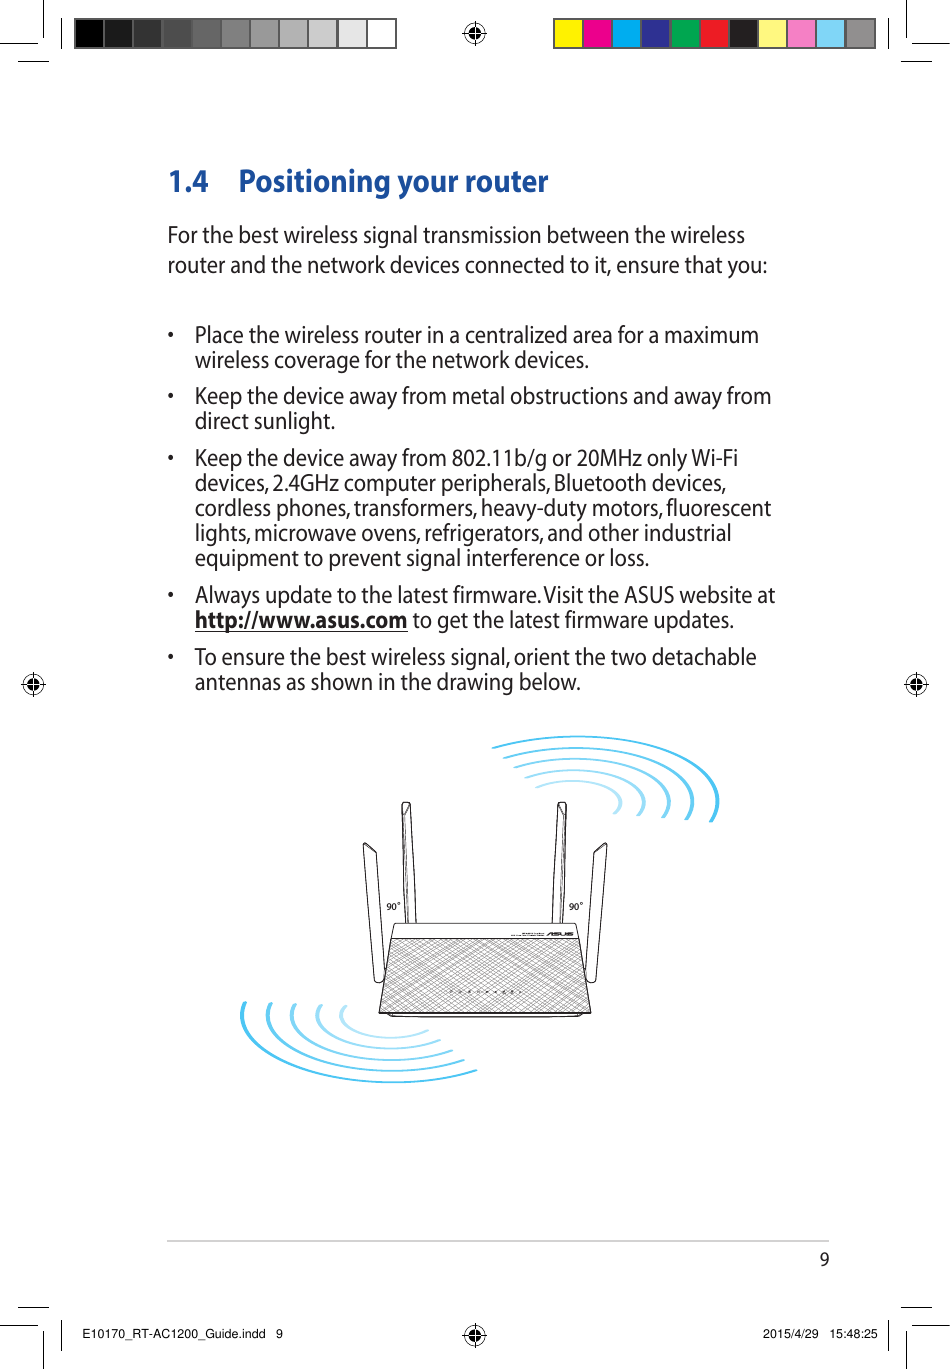 91.4  Positioning your routerFor the best wireless signal transmission between the wireless router and the network devices connected to it, ensure that you:• Placethewirelessrouterinacentralizedareaforamaximumwireless coverage for the network devices.• Keepthedeviceawayfrommetalobstructionsandawayfromdirect sunlight.• Keepthedeviceawayfrom802.11b/gor20MHzonlyWi-Fidevices, 2.4GHz computer peripherals, Bluetooth devices, cordlessphones,transformers,heavy-dutymotors,fluorescentlights, microwave ovens, refrigerators, and other industrial equipment to prevent signal interference or loss.• Alwaysupdatetothelatestfirmware.VisittheASUSwebsiteathttp://www.asus.com to get the latest firmware updates.• Toensurethebestwirelesssignal,orientthetwodetachableantennas as shown in the drawing below.90°90°E10170_RT-AC1200_Guide.indd   9 2015/4/29   15:48:25